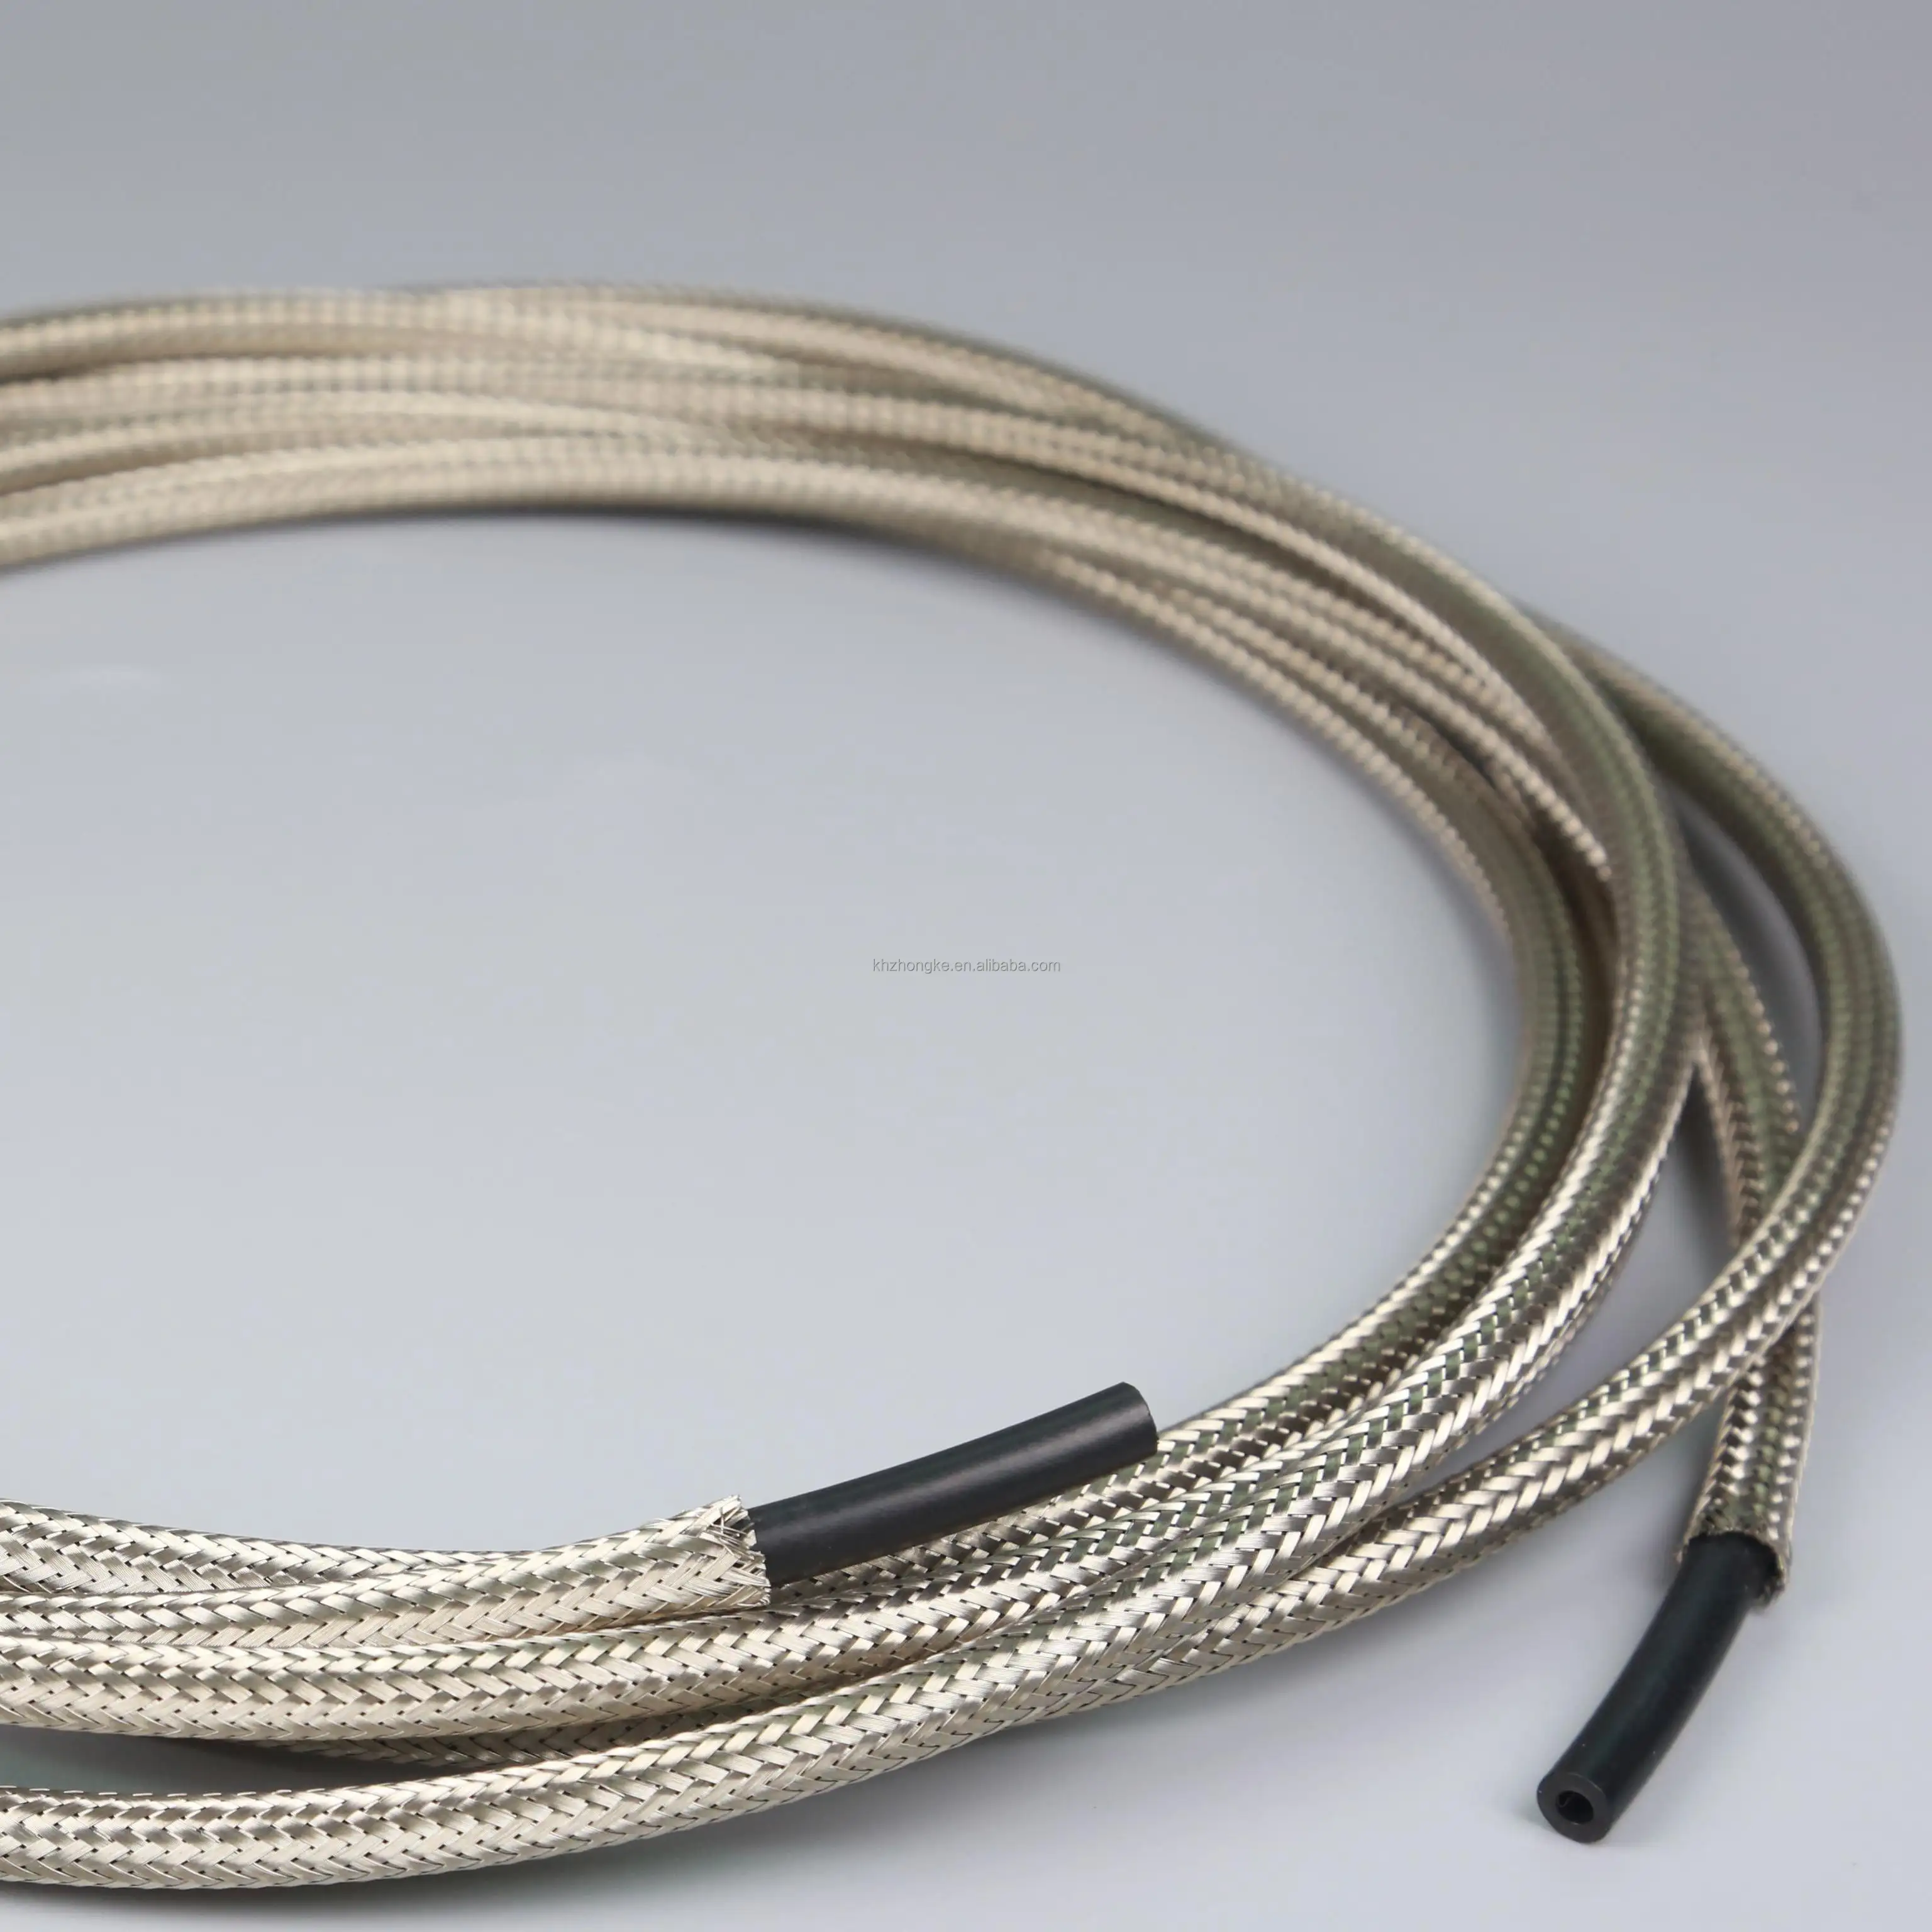 Professional Copper Wire Screening Braided Sleeving for Electromagnetic Shielding with high quality